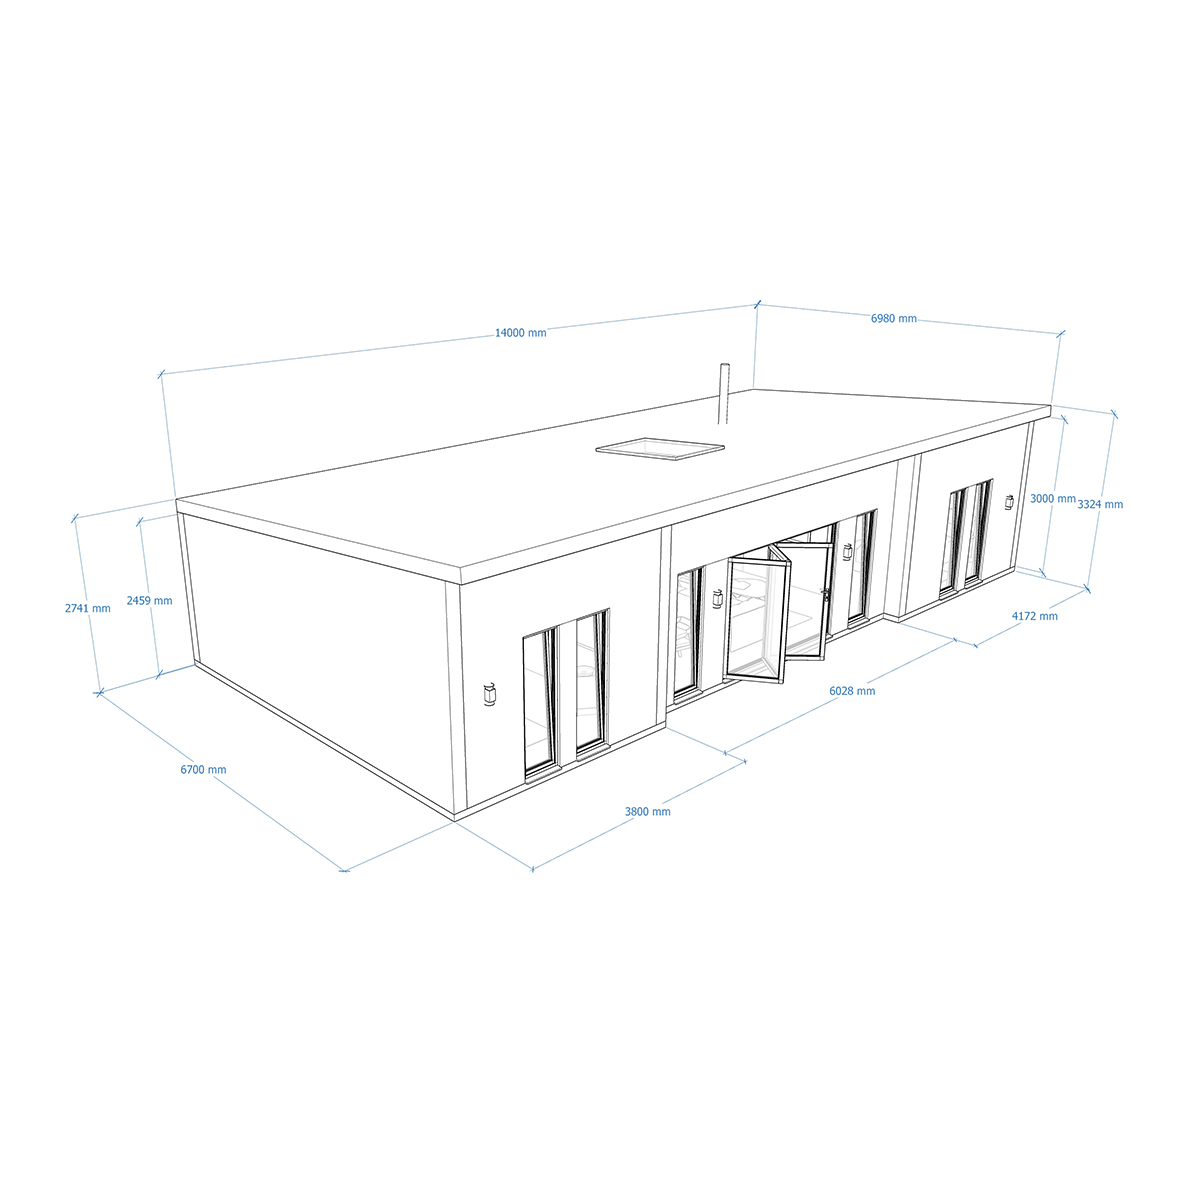 Exterior dimensions of bespoke mobile home